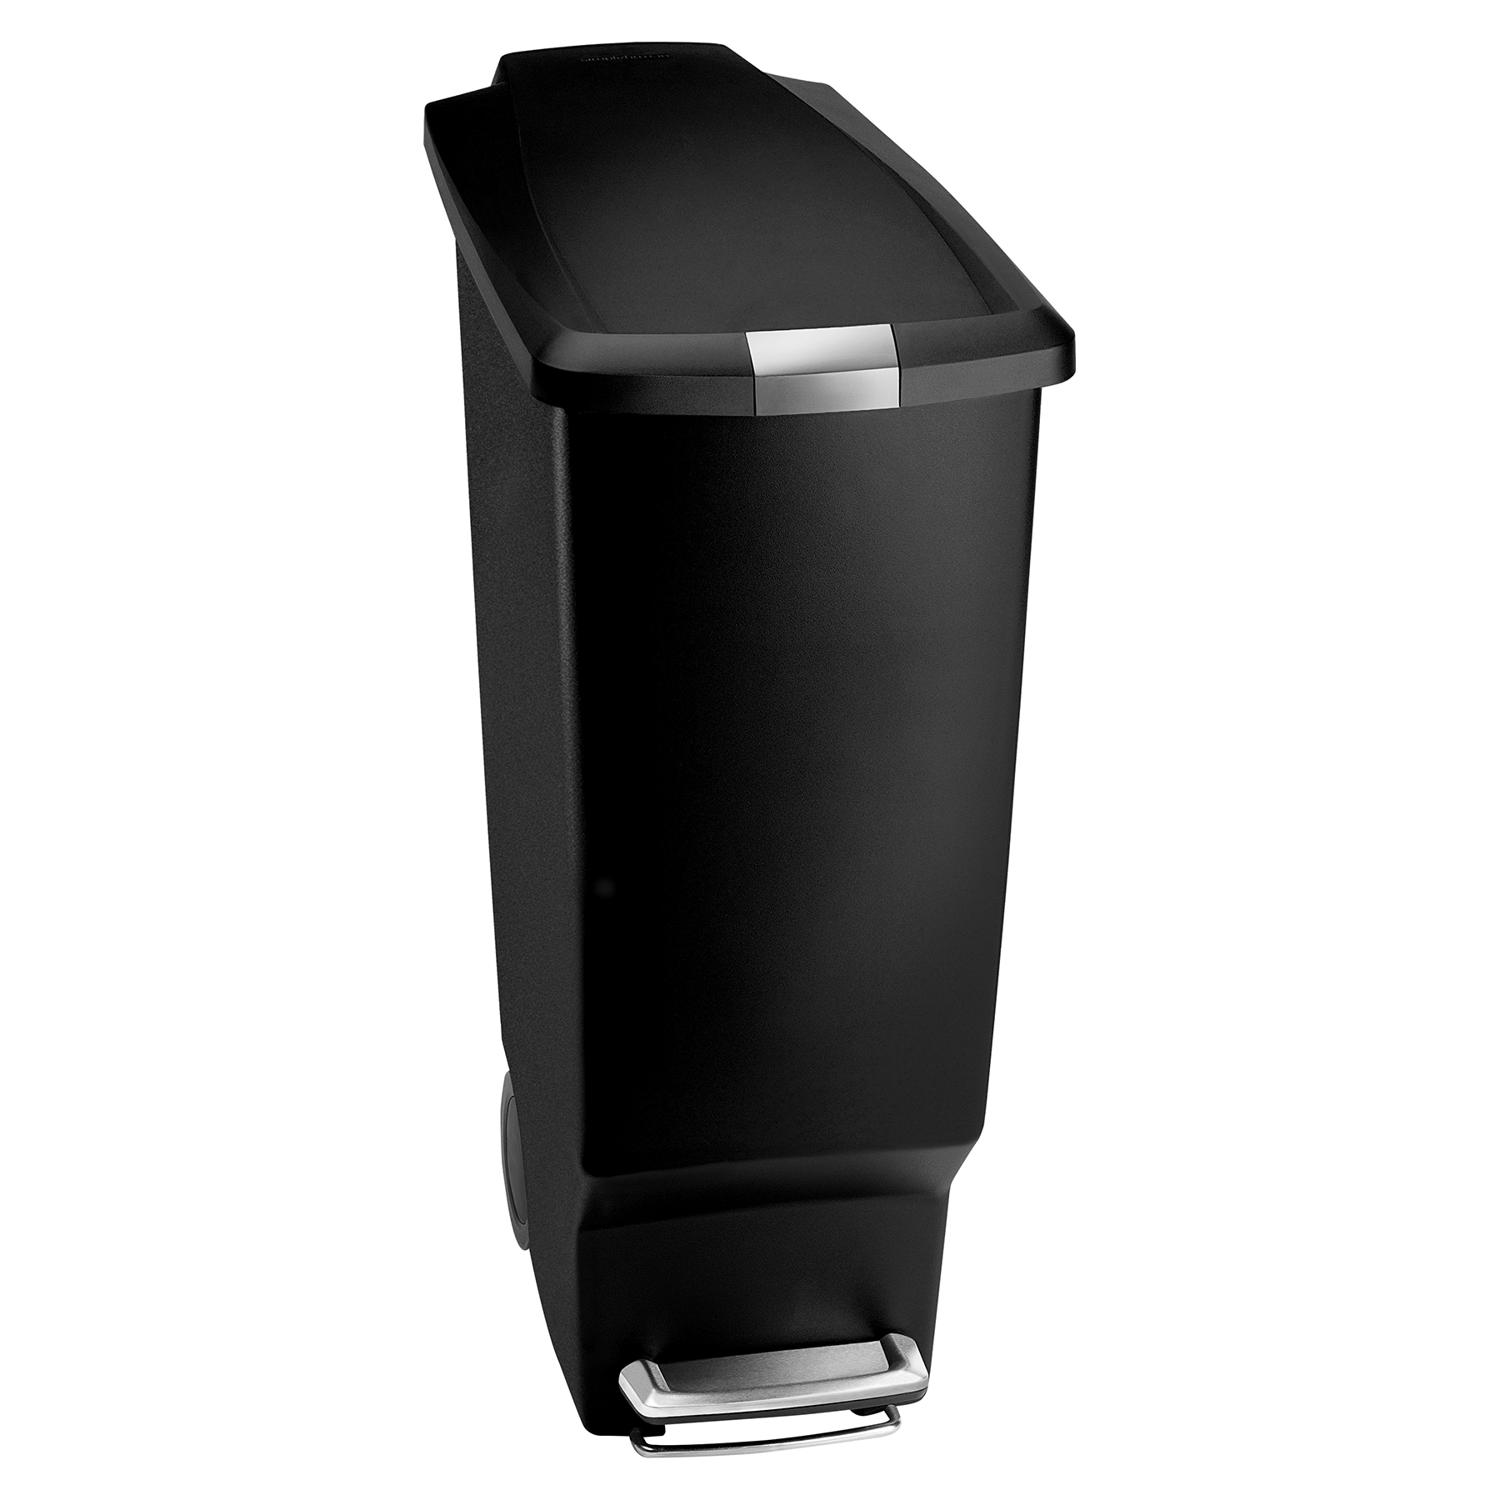 Photos - Other interior and decor Simplehuman Simpehuman 40 L Black Plastic Step On Trash Can CW1395 